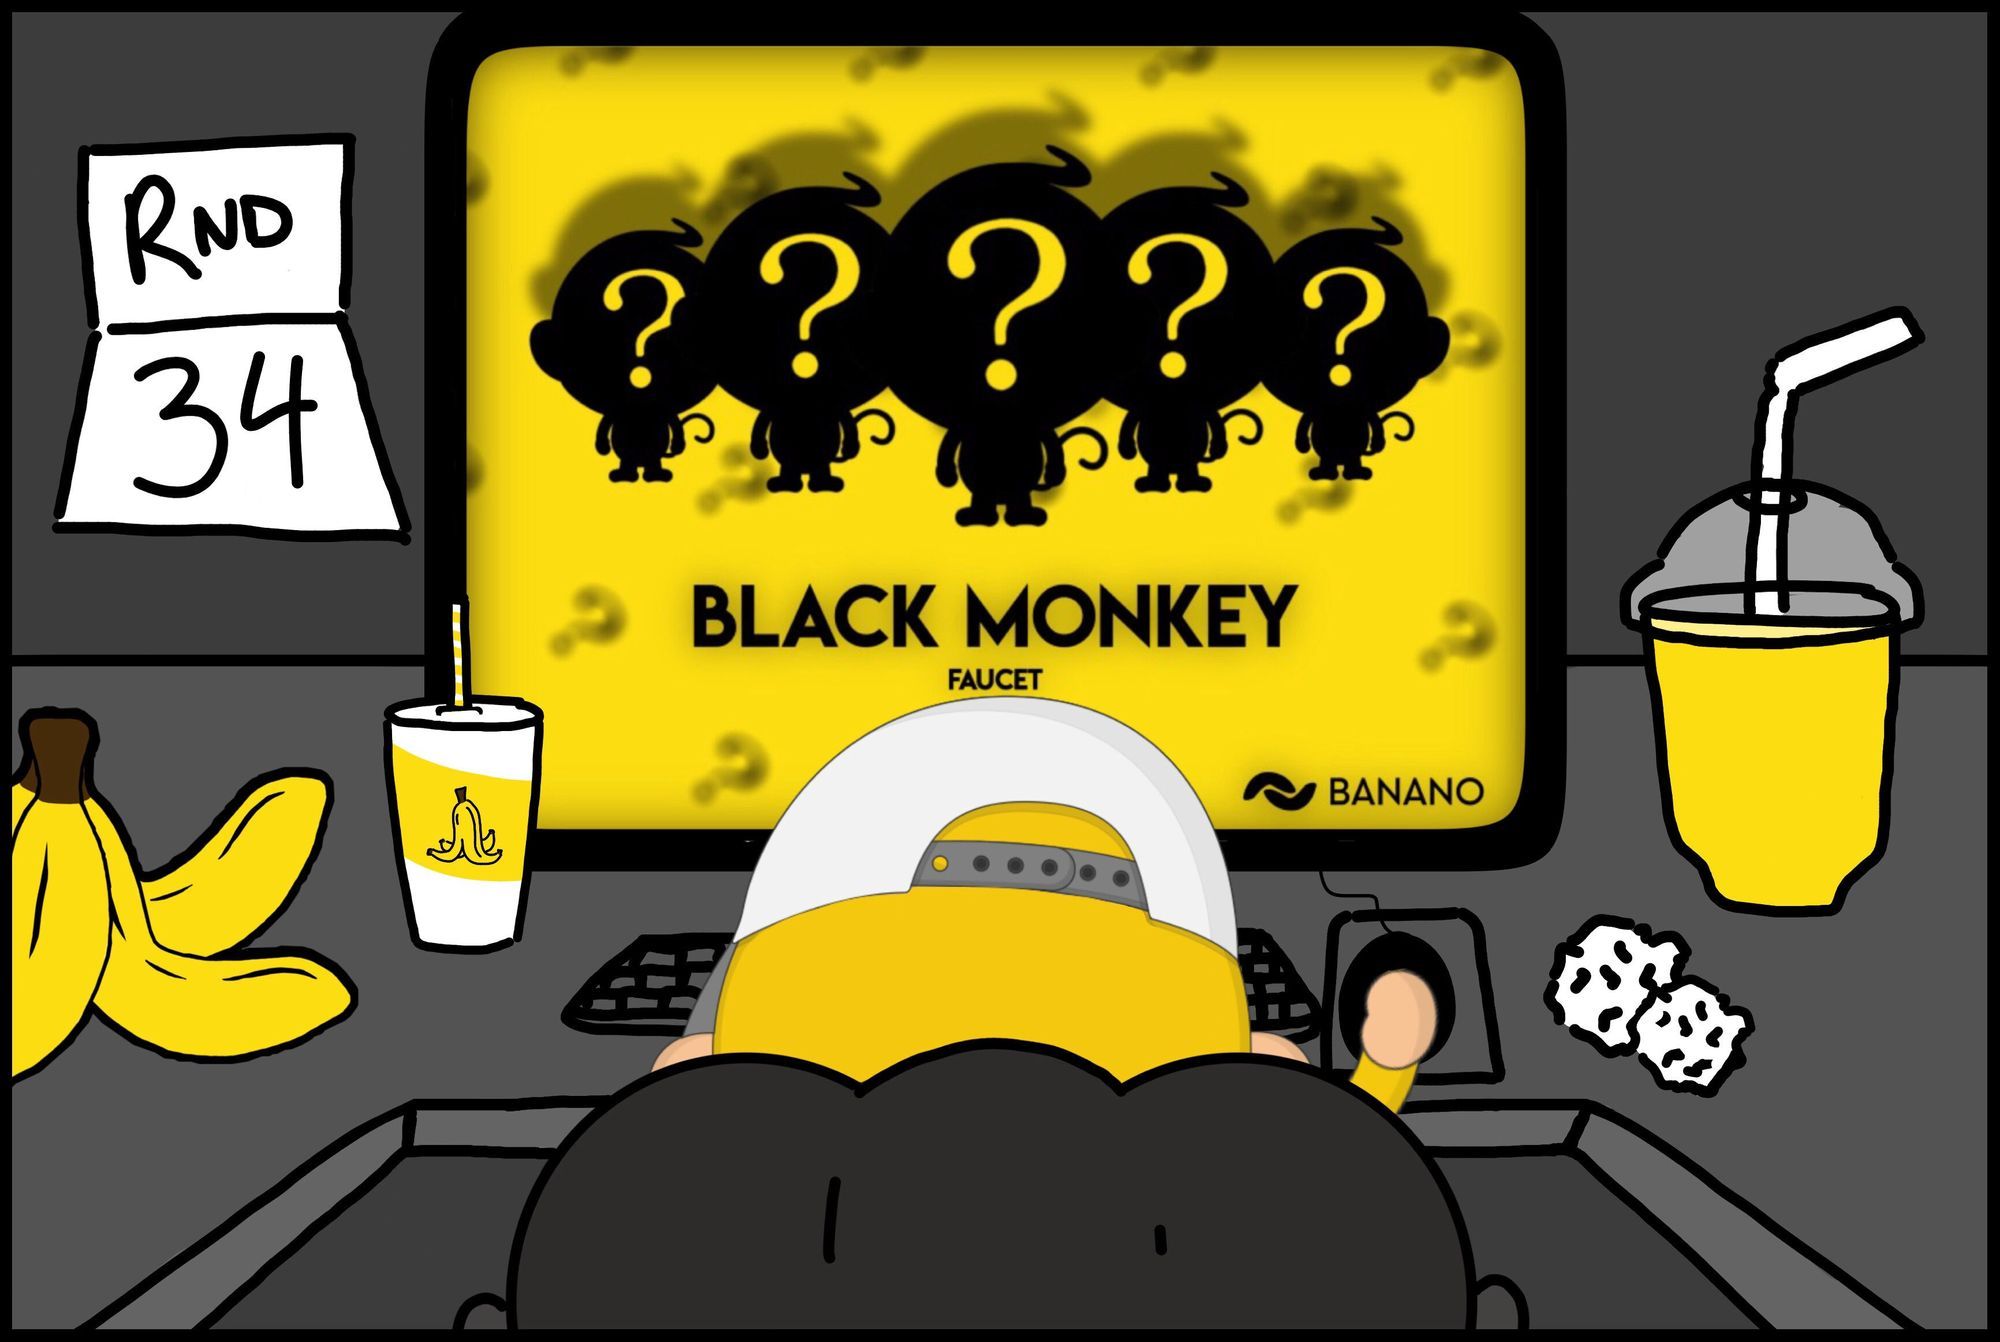 Play the Popular Faucet Game ‘Black Monkey’ and Earn Free Crypto — Round 34 Starting Shortly!